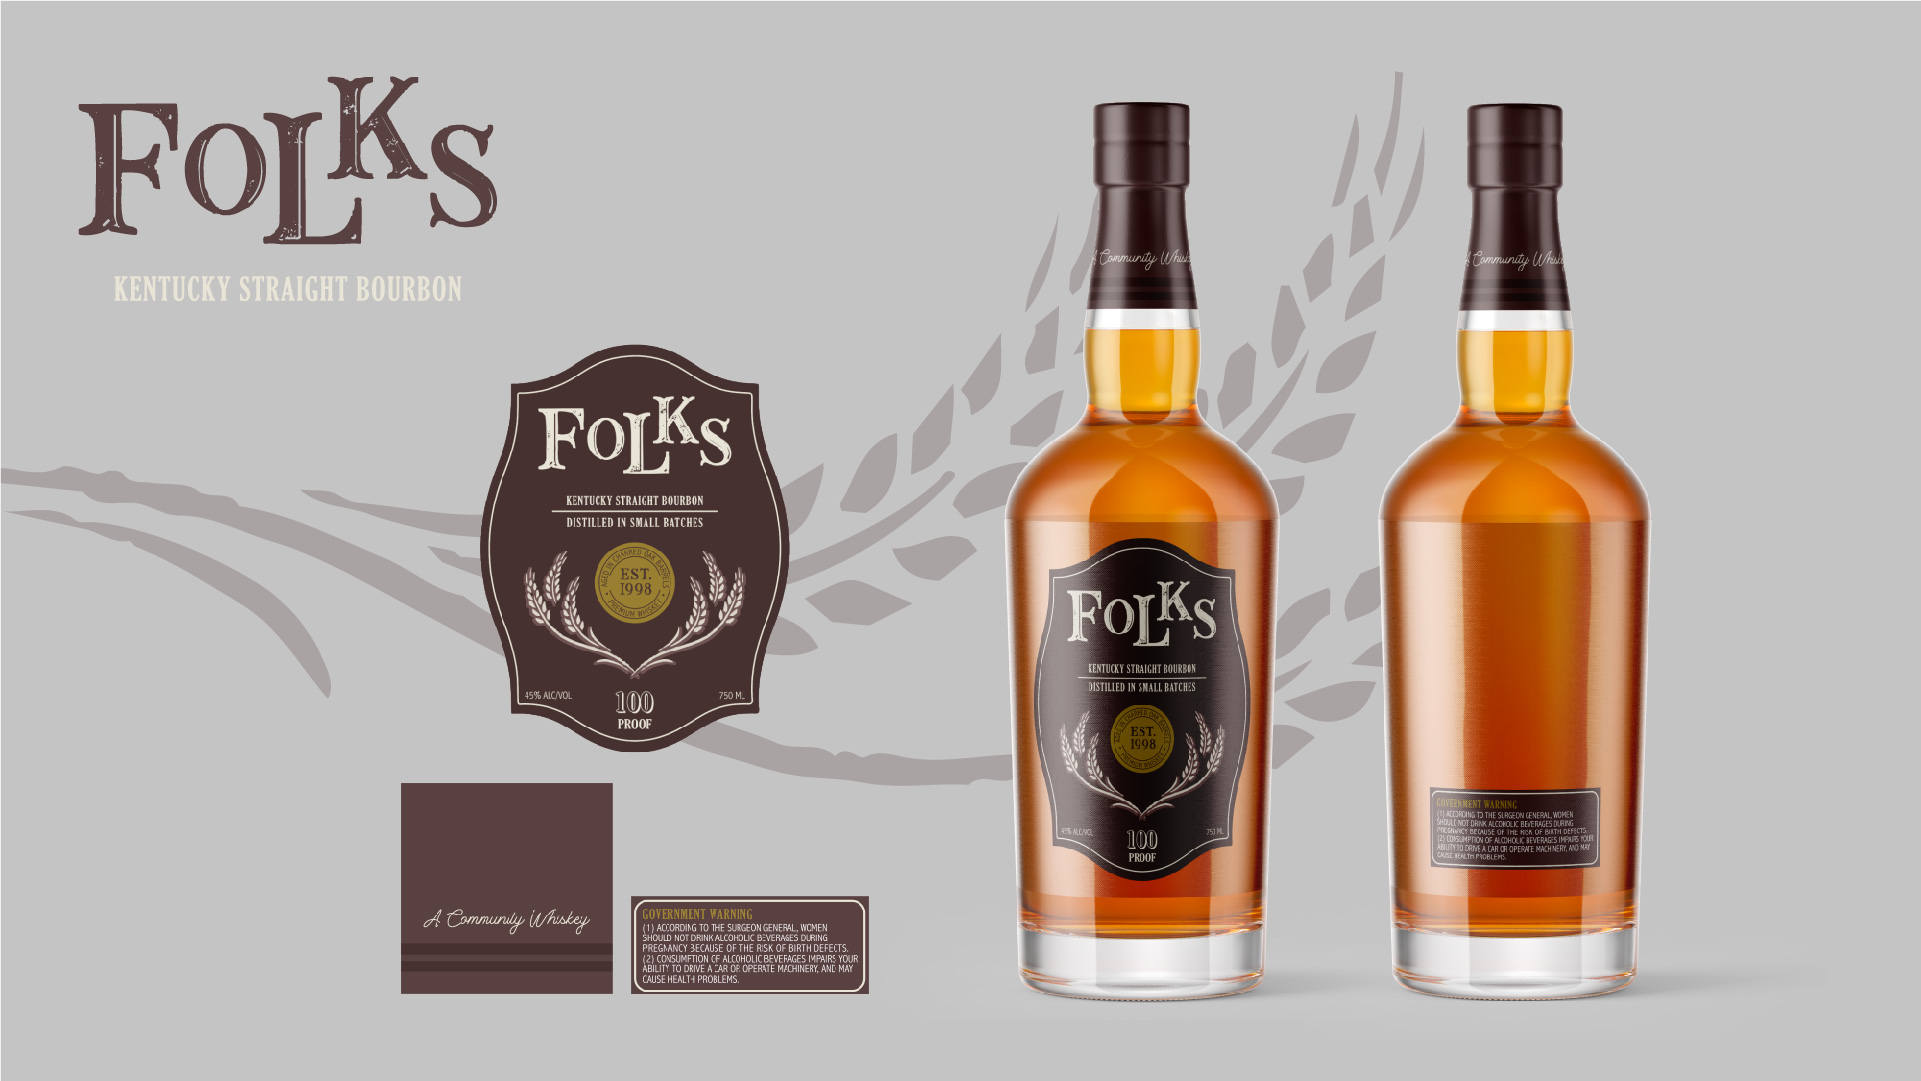  / "“Folks, Kentucky Straight Bourbon,” glass bottle labels, various sizes, 2021. Label design made up of three separate labels to show off the brand Folks. Intended to stand amongst other middle-shelf bourbons and to be enjoyed amongst the demographic of bourbon drinkers in the southern United States. " 